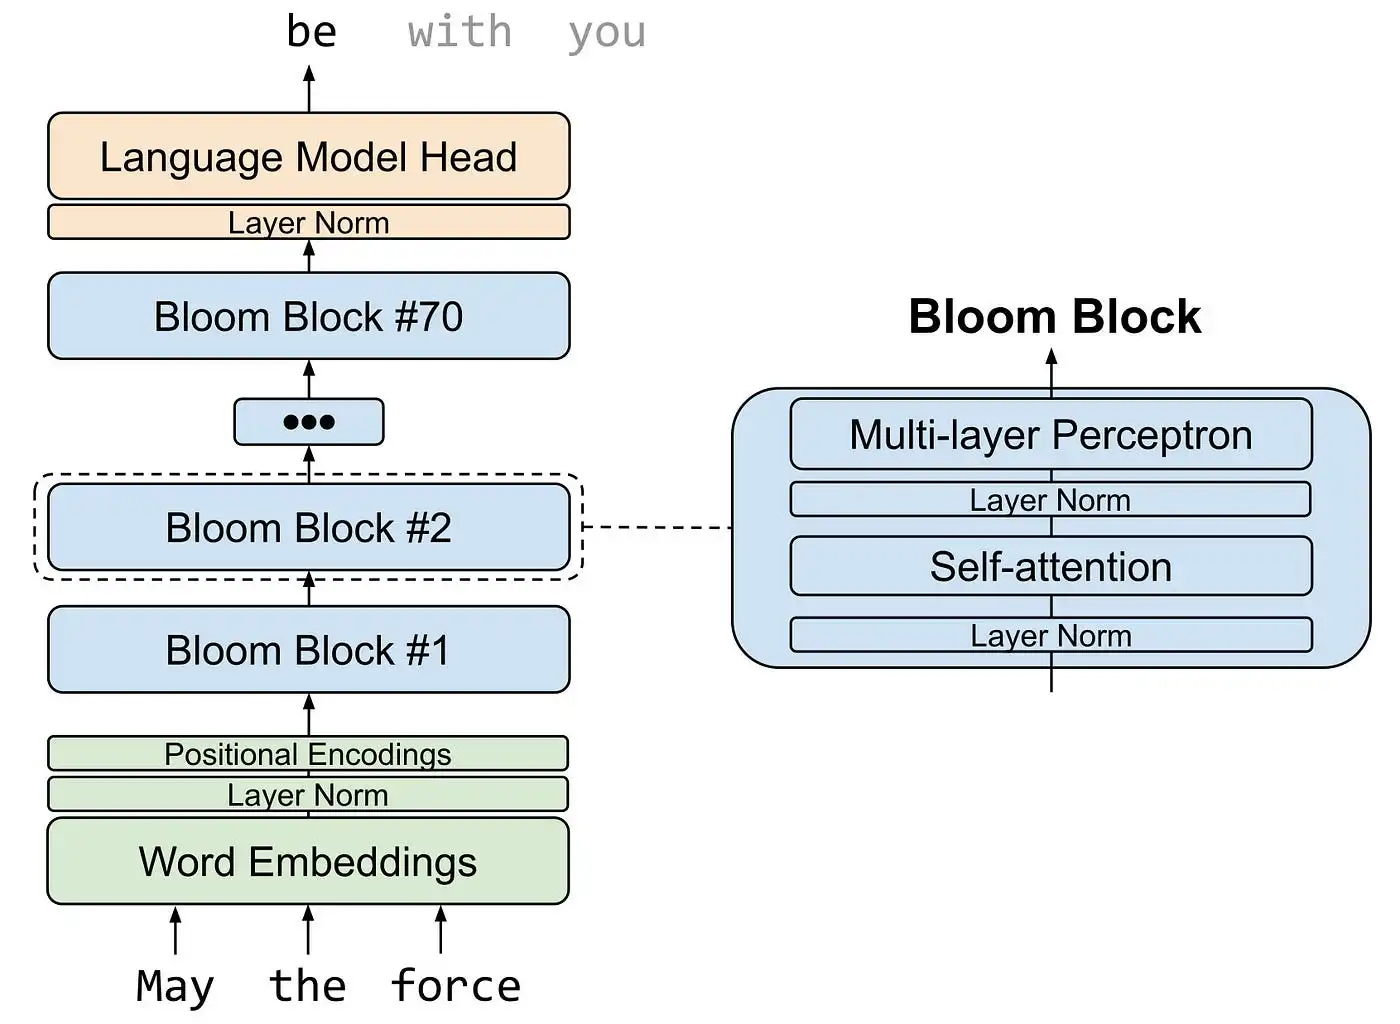 Crafting Effective Prompts for Bloom LLM